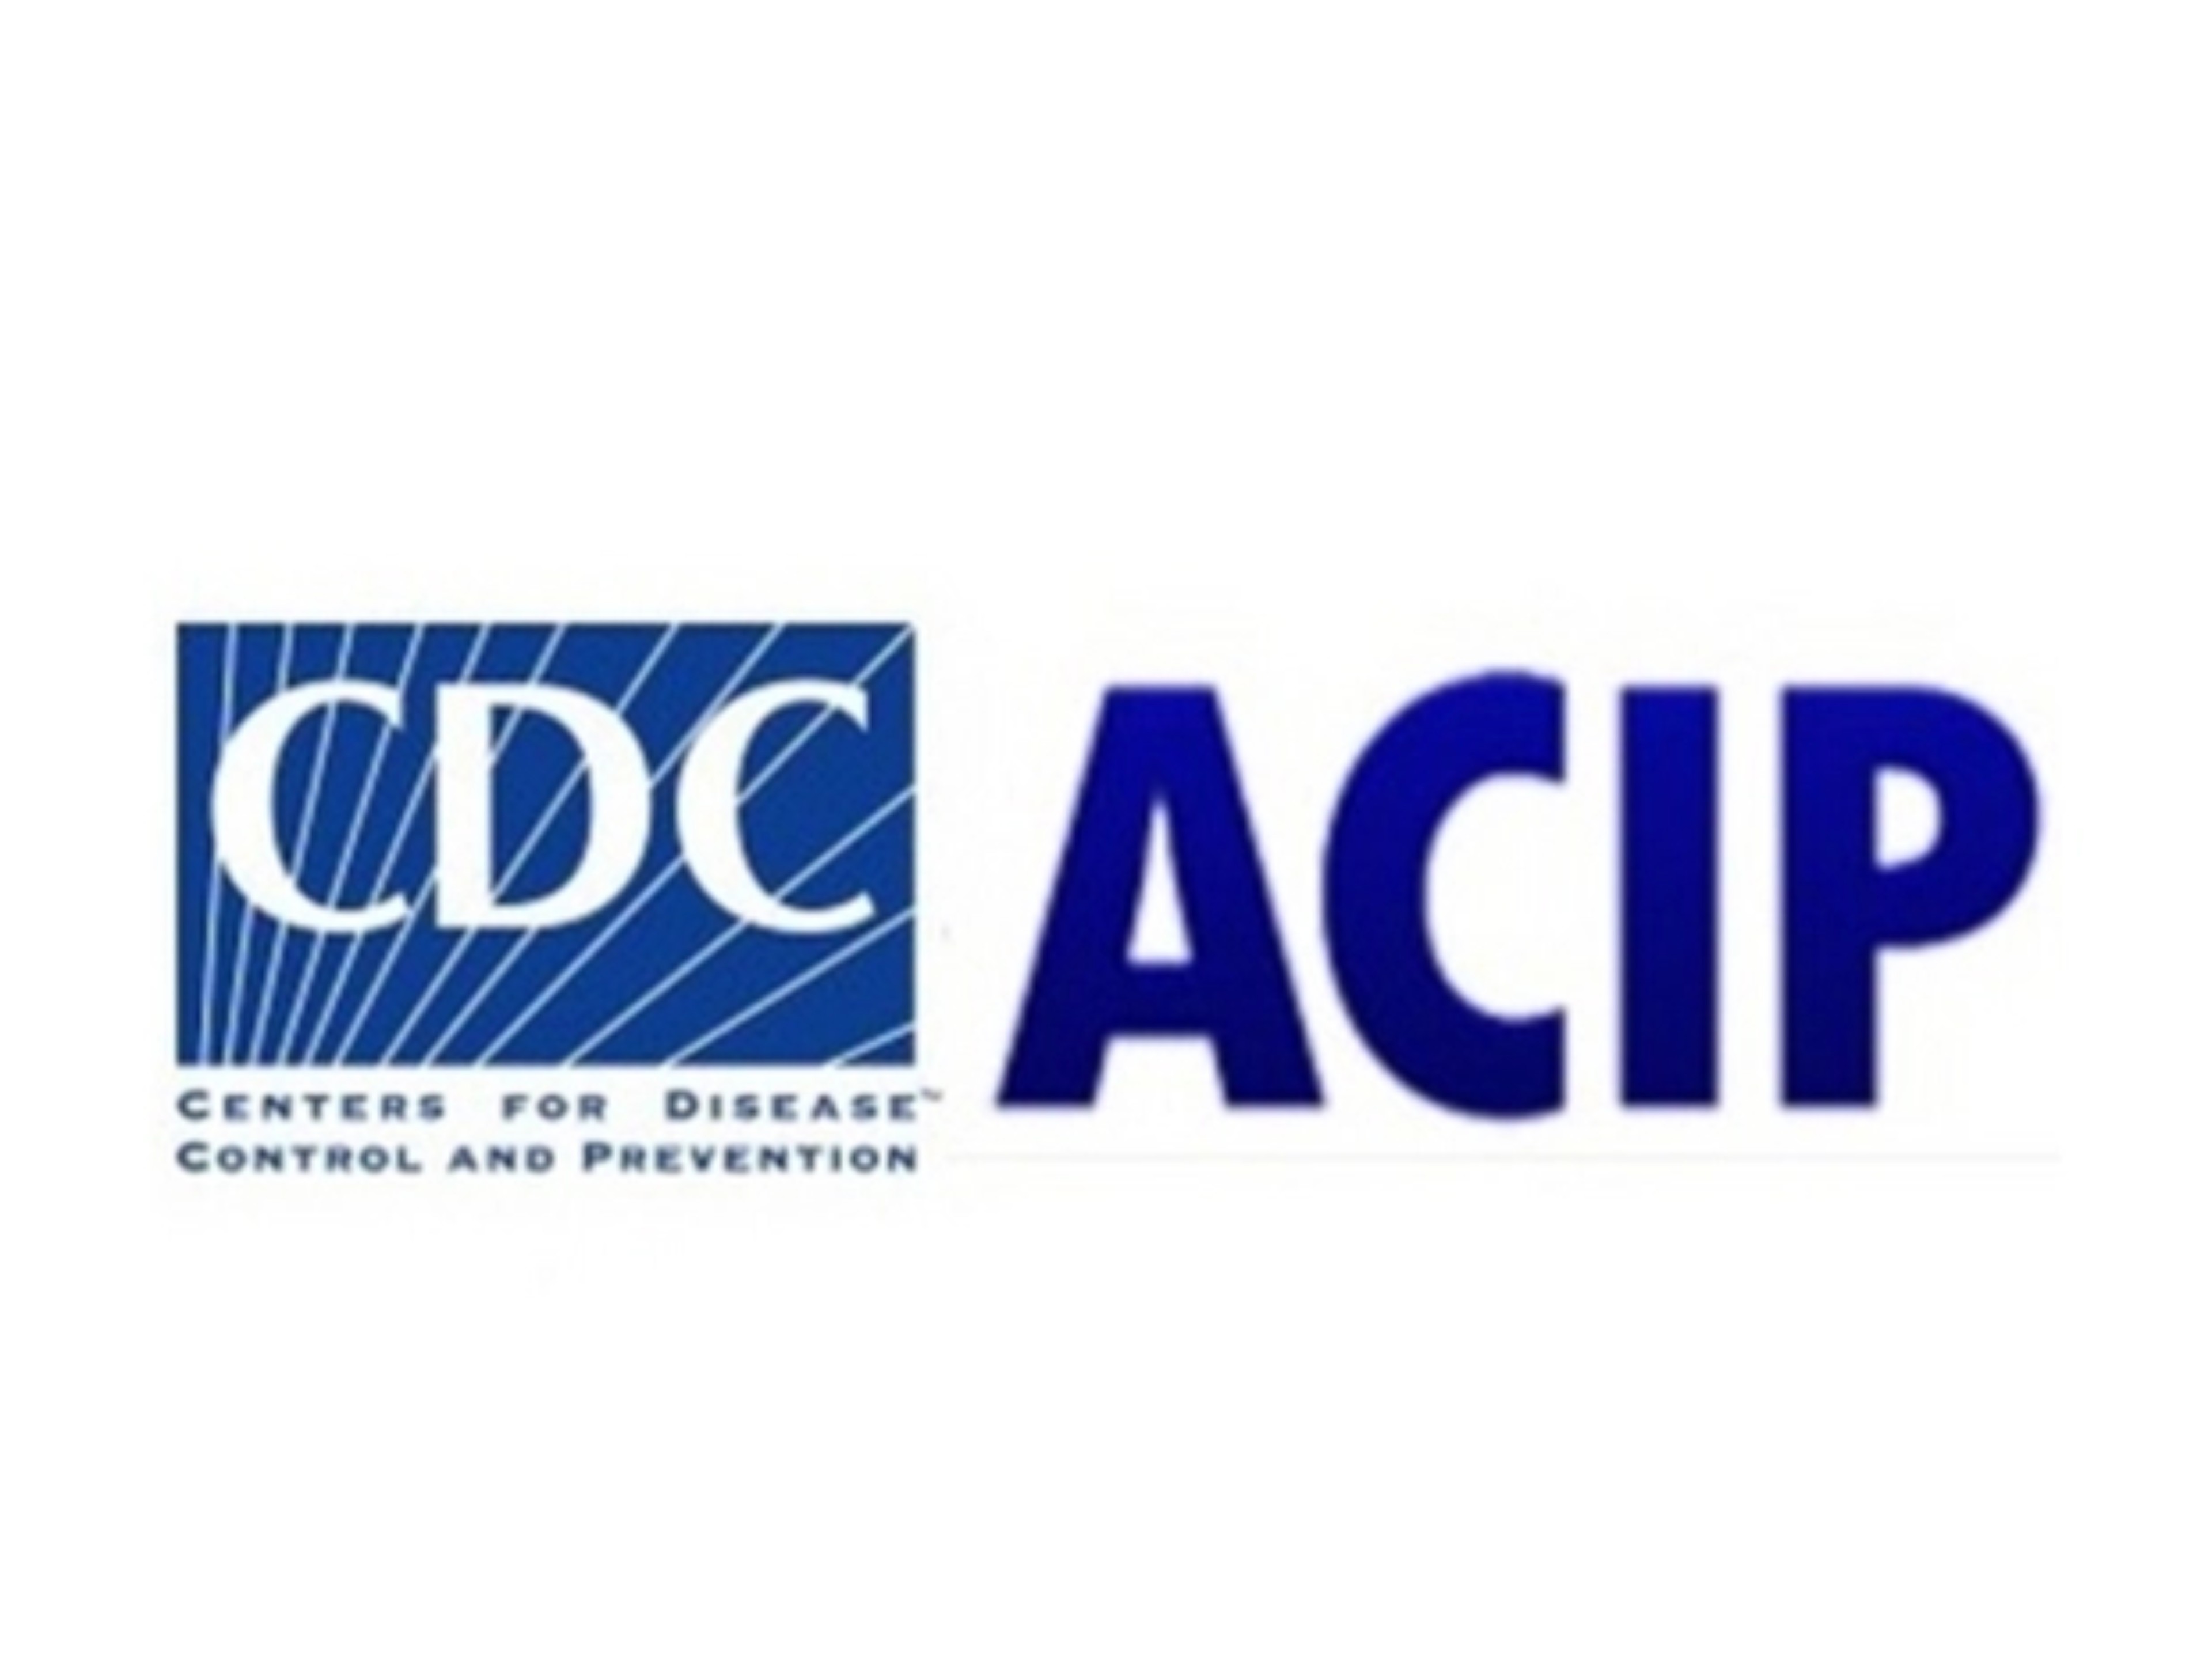 Centers for Disease Control and Prevention/Advisory Committee on Immunization Practices